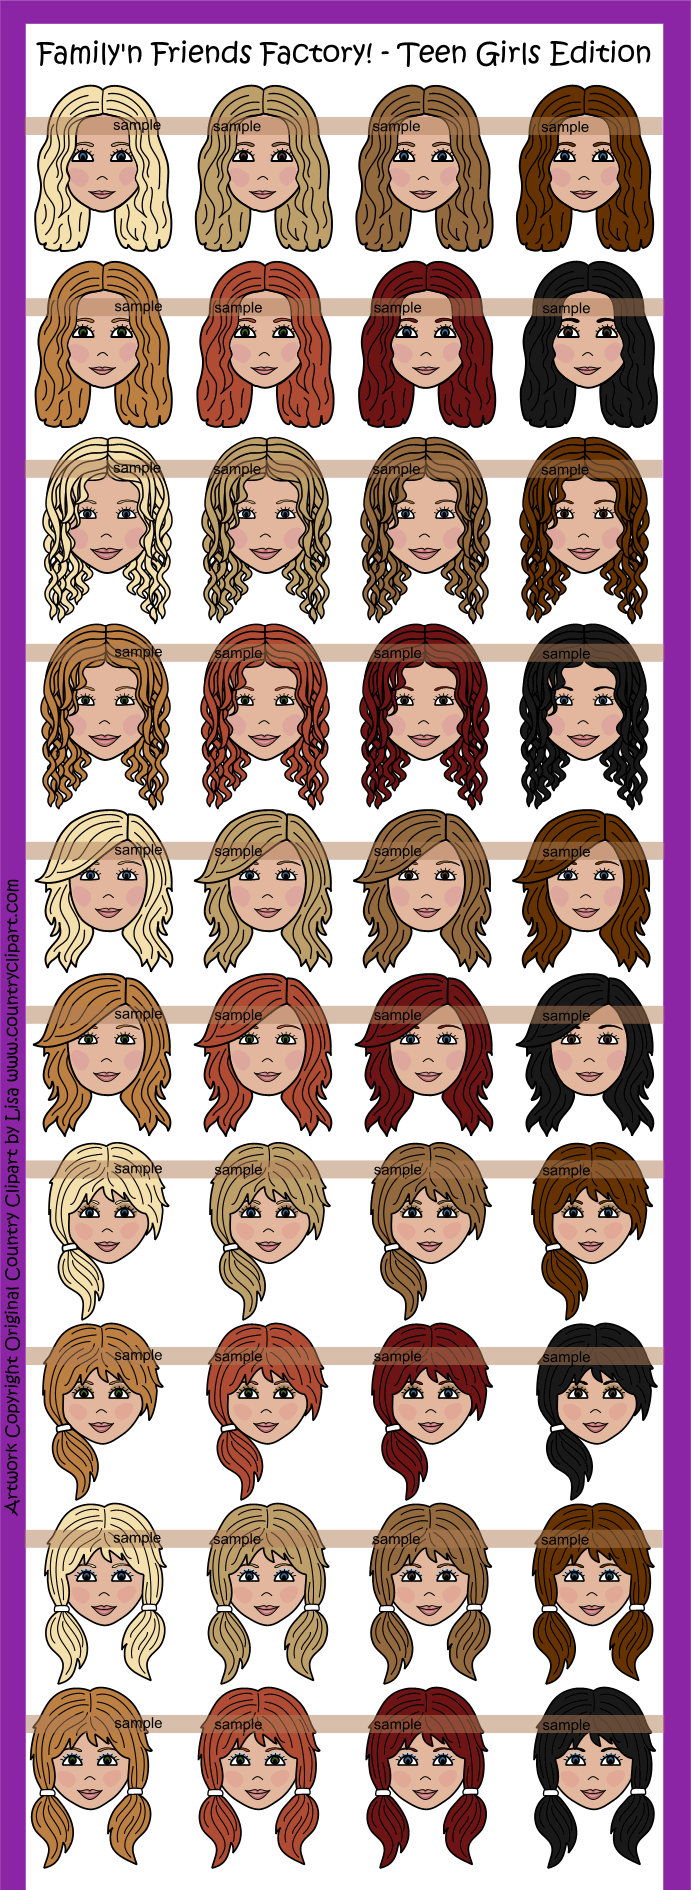 People Graphics   Clipart Family  N Friends Factory Teen Girls Edition